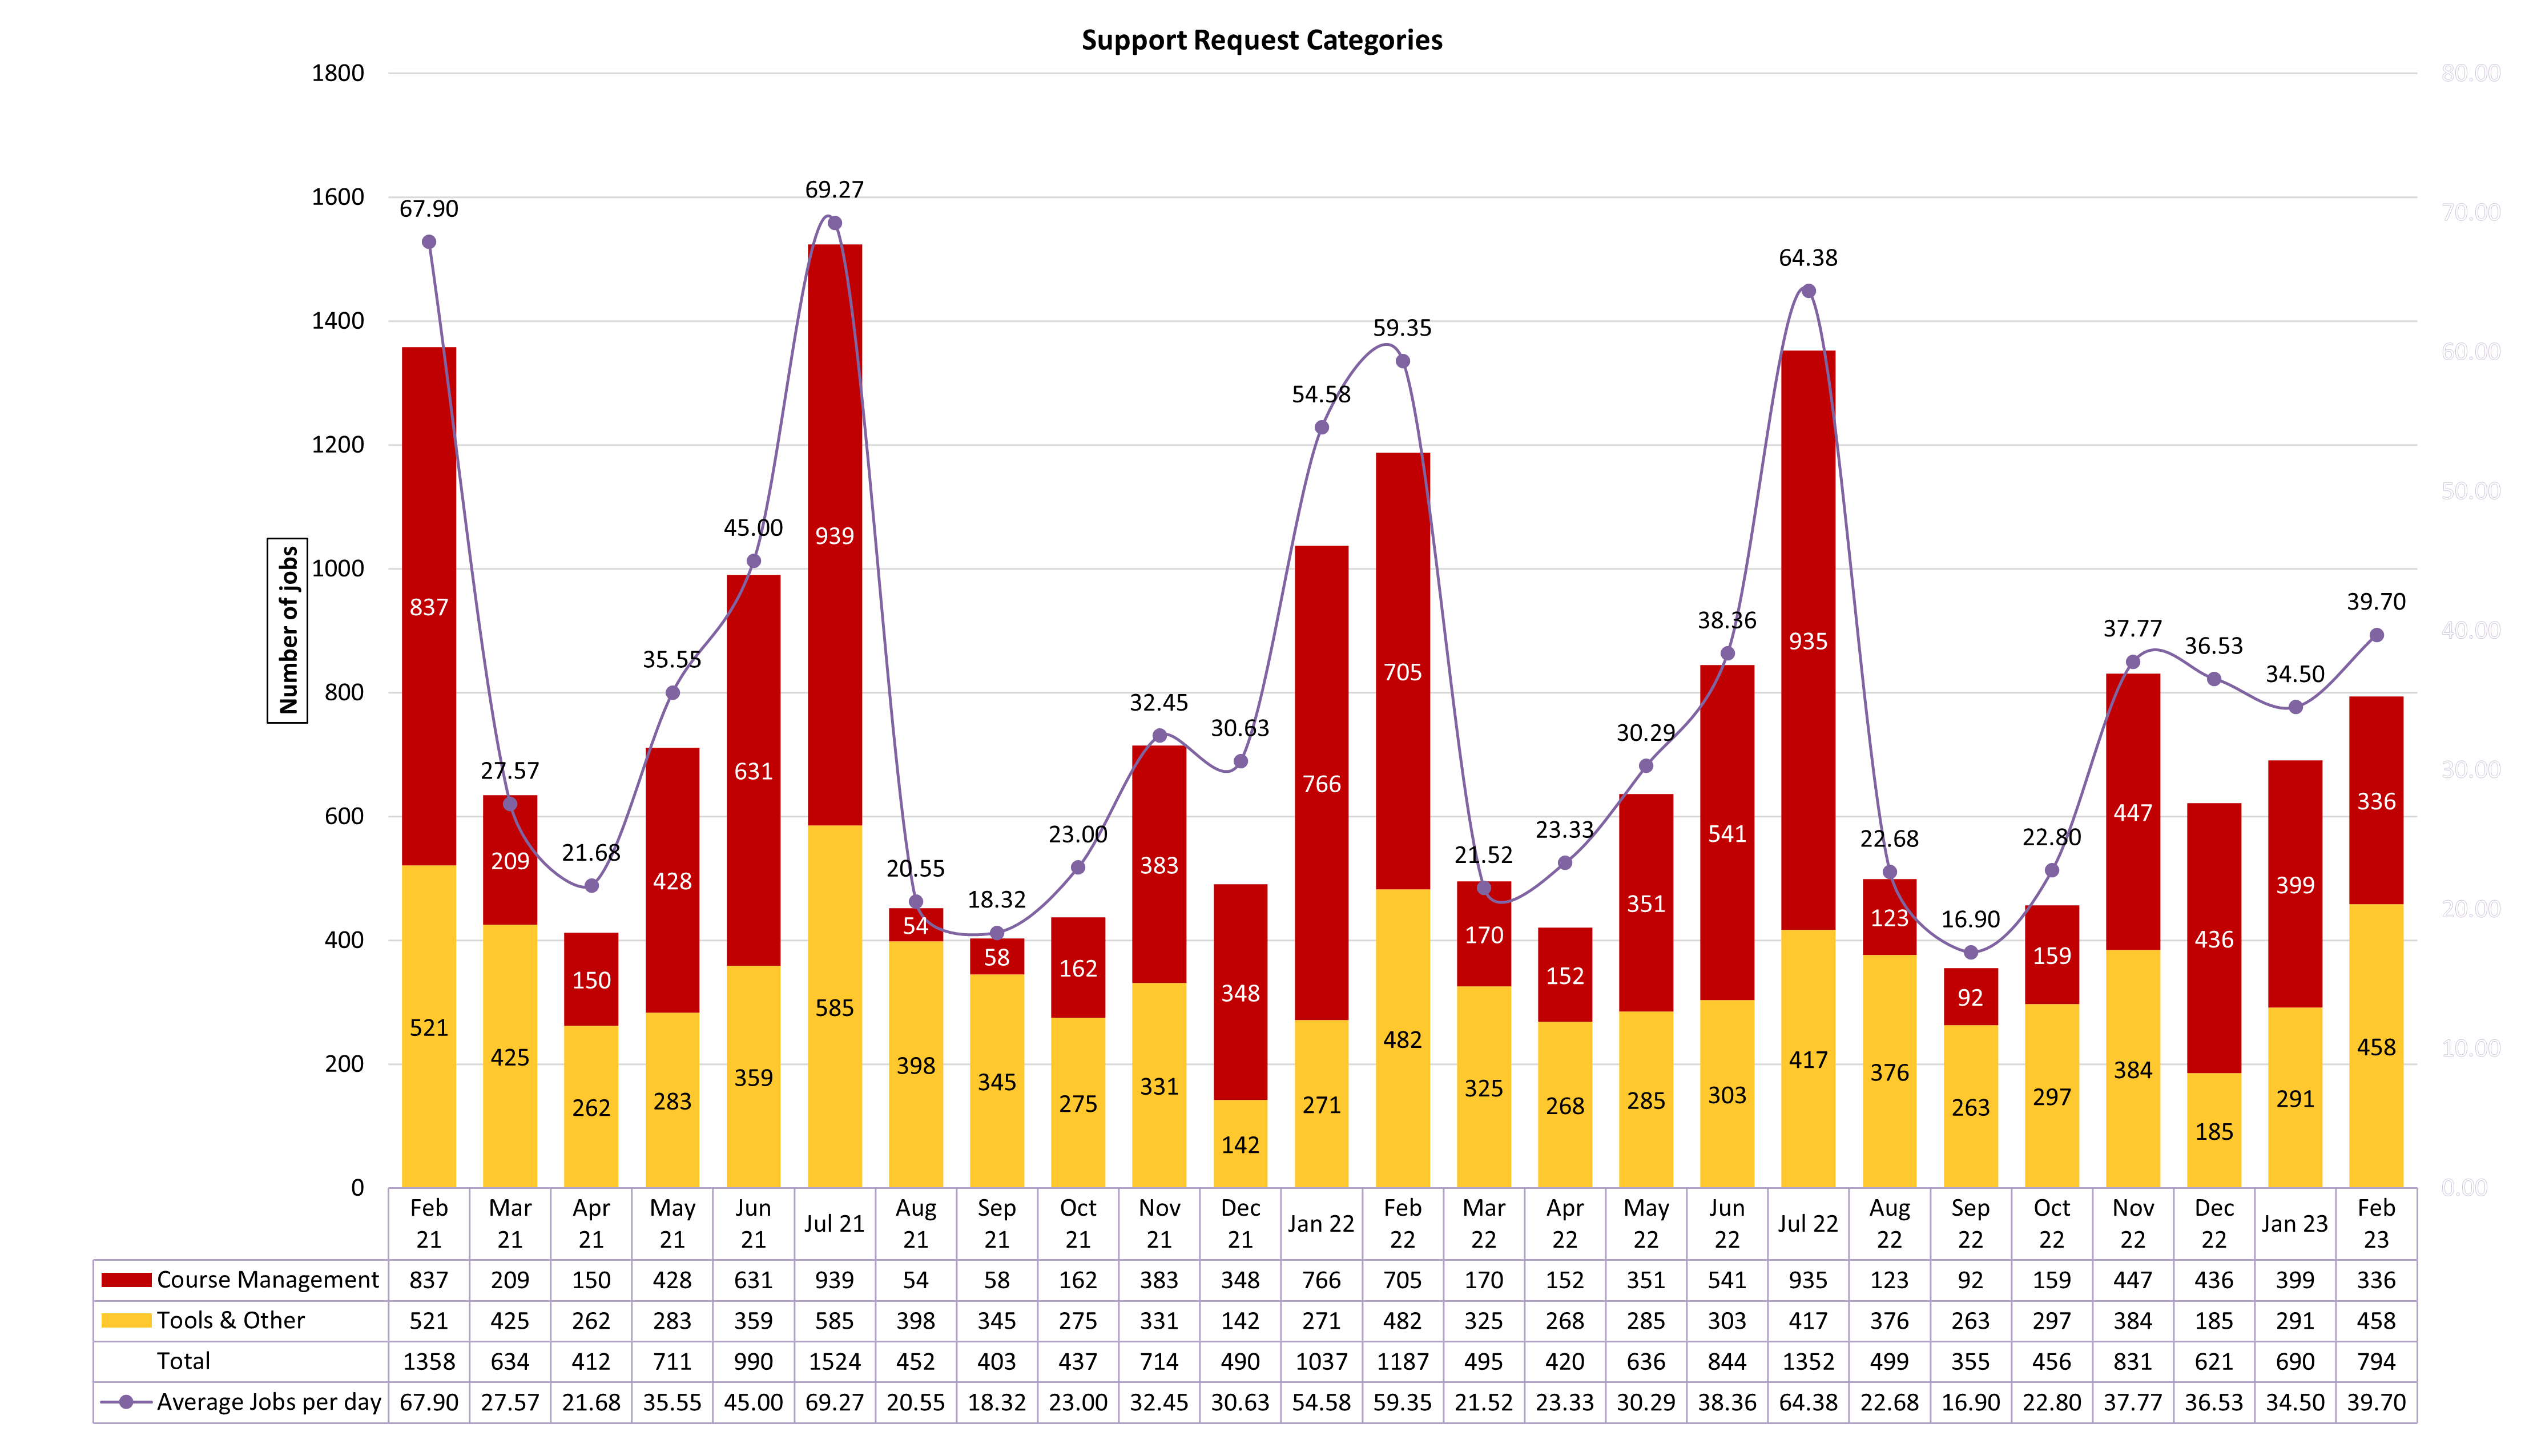 Chart of Support Request Categories from February 2021 to February 2023